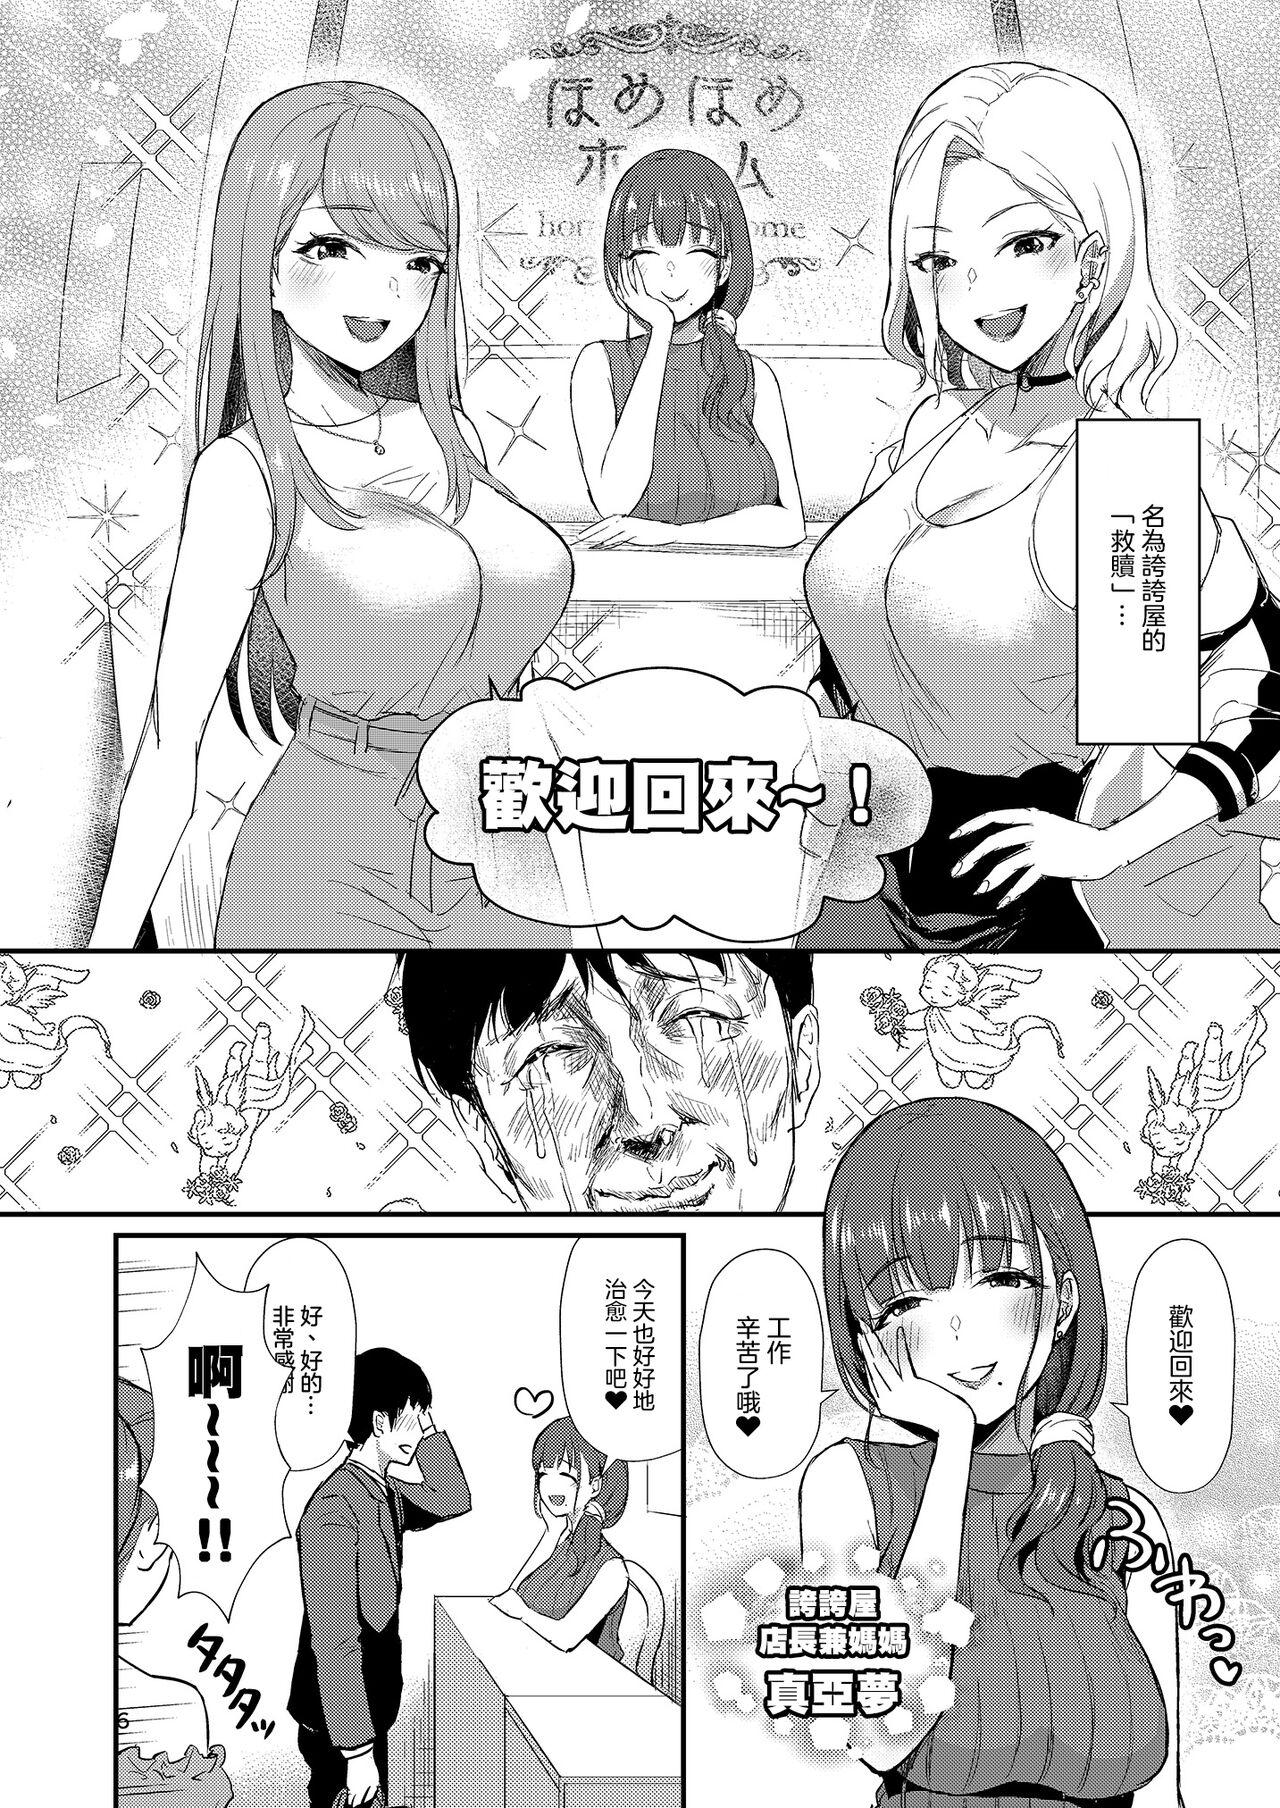 Classy Homehome Home e Youkoso! - Welcome to Home Home Home! | 歡迎來到誇誇屋！ Venezuela - Page 7